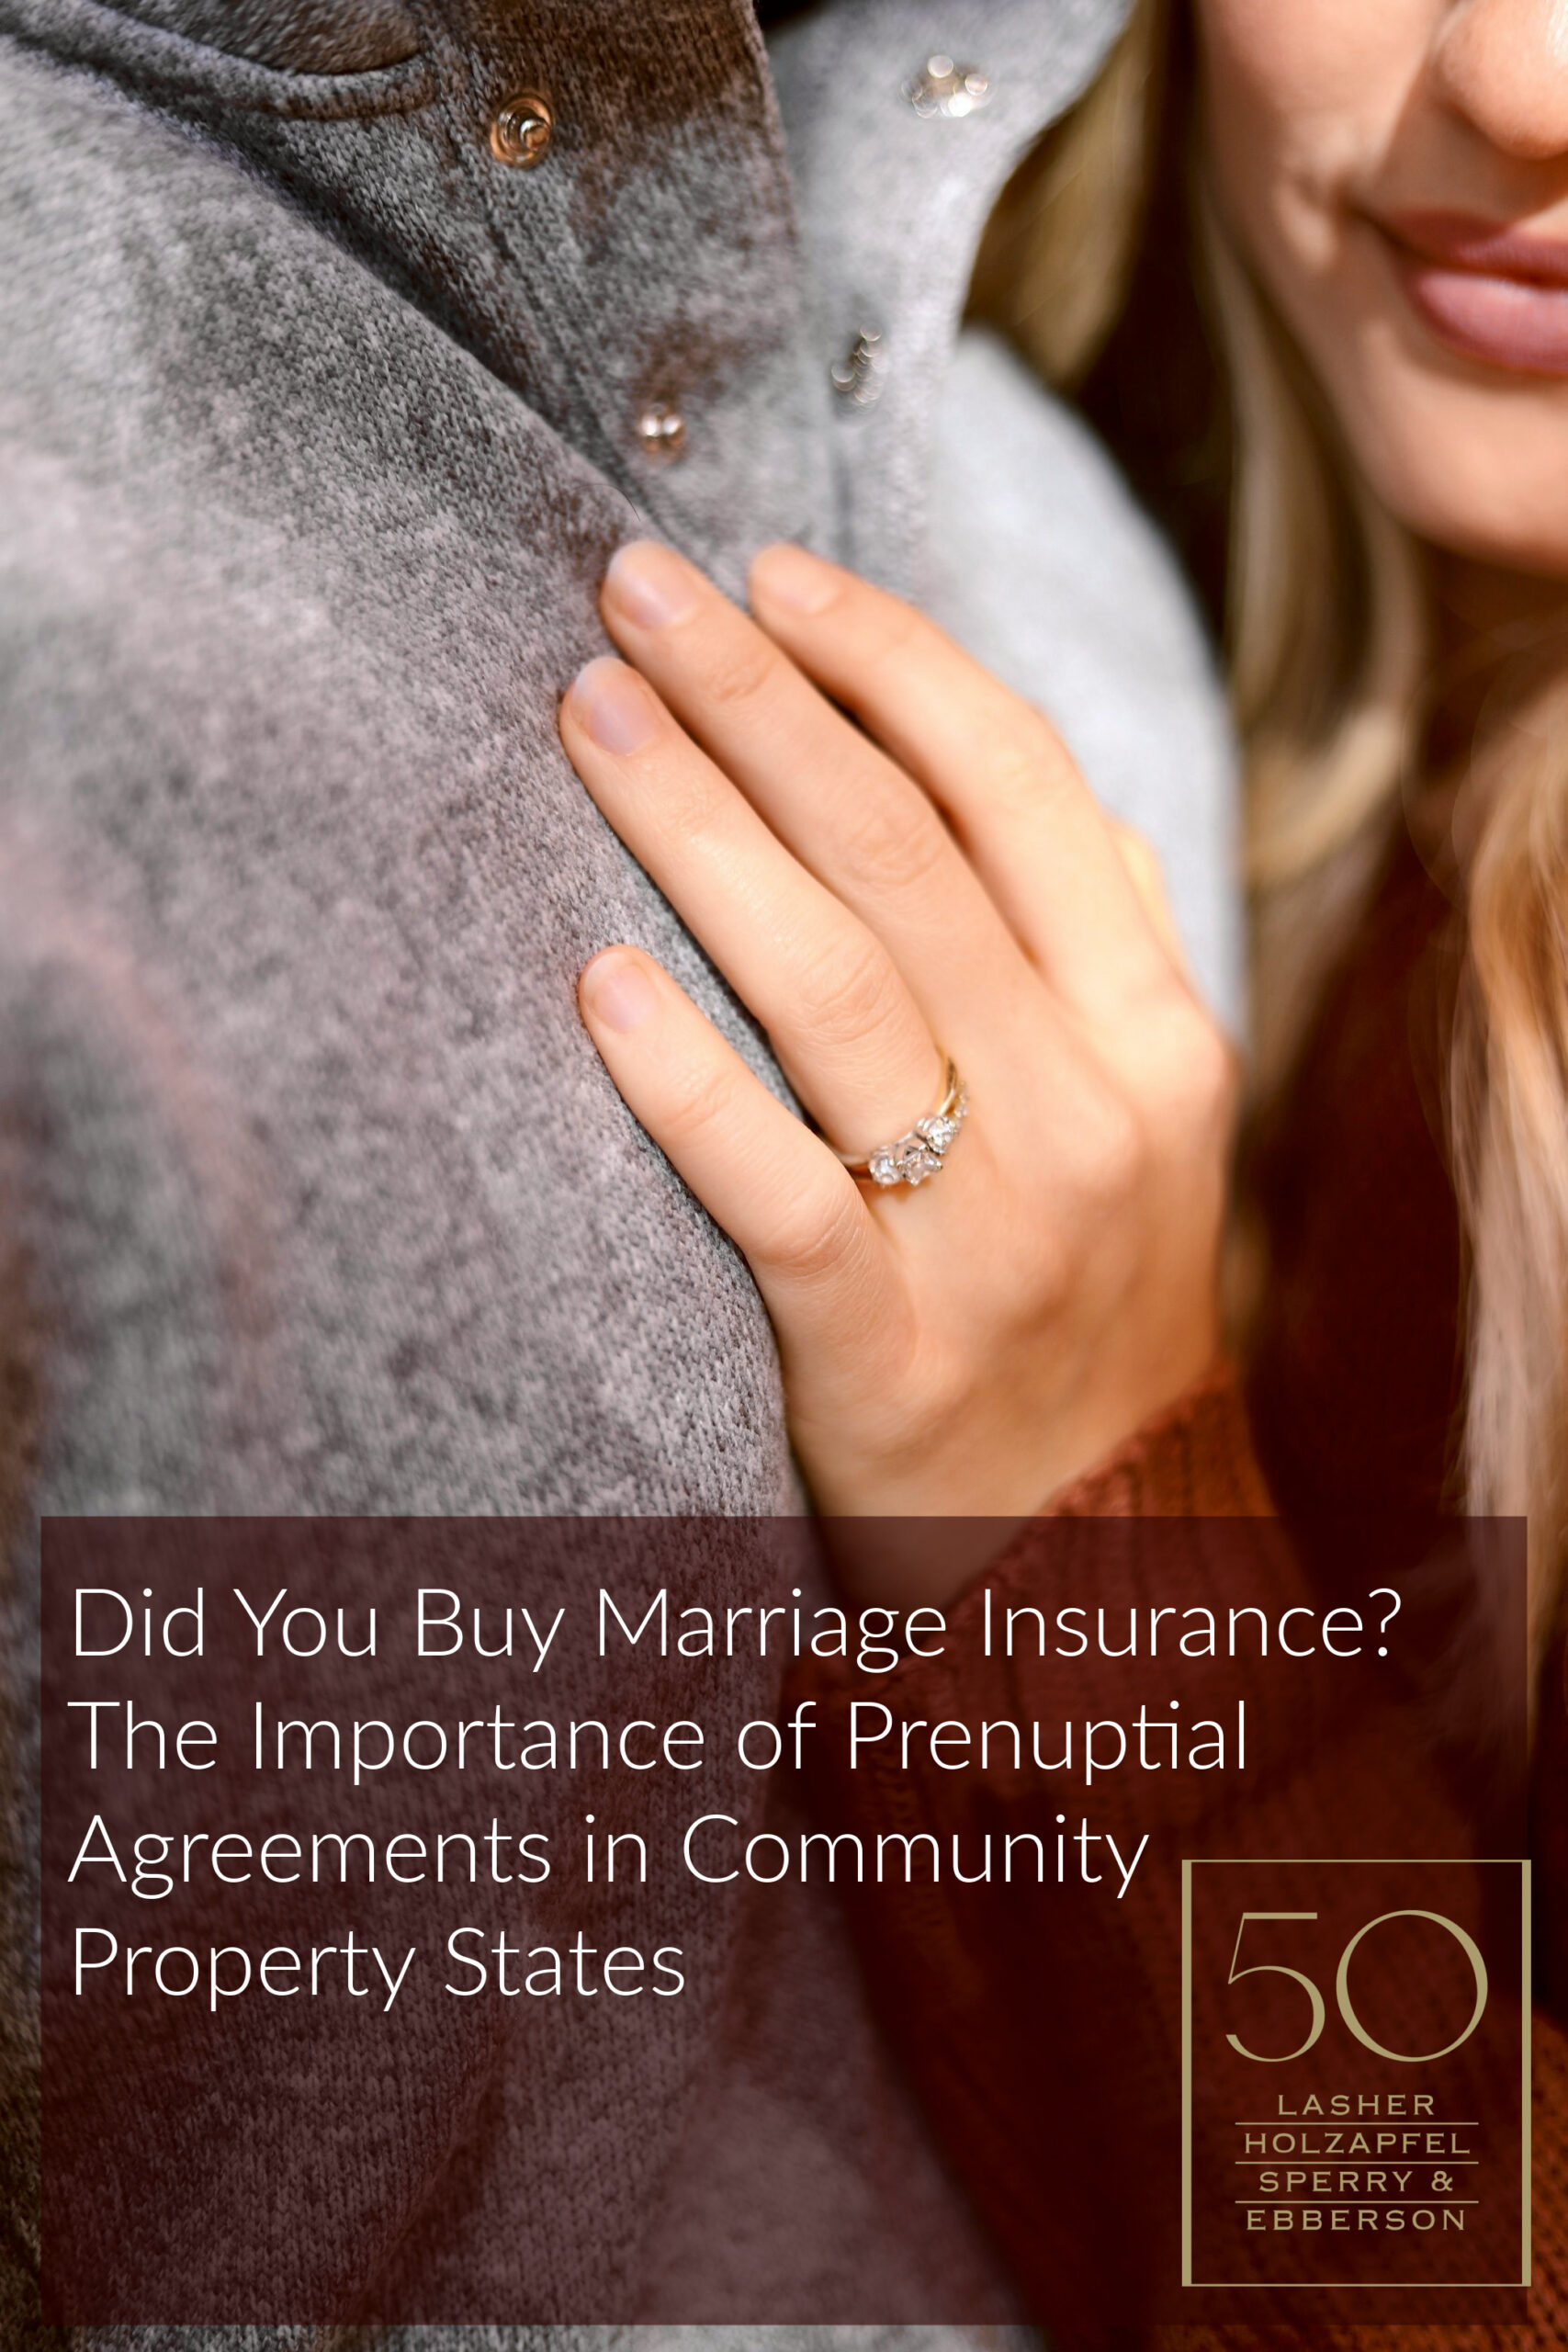 Did You Buy Marriage Insurance? The Importance of Prenuptial Agreements in Community Property States